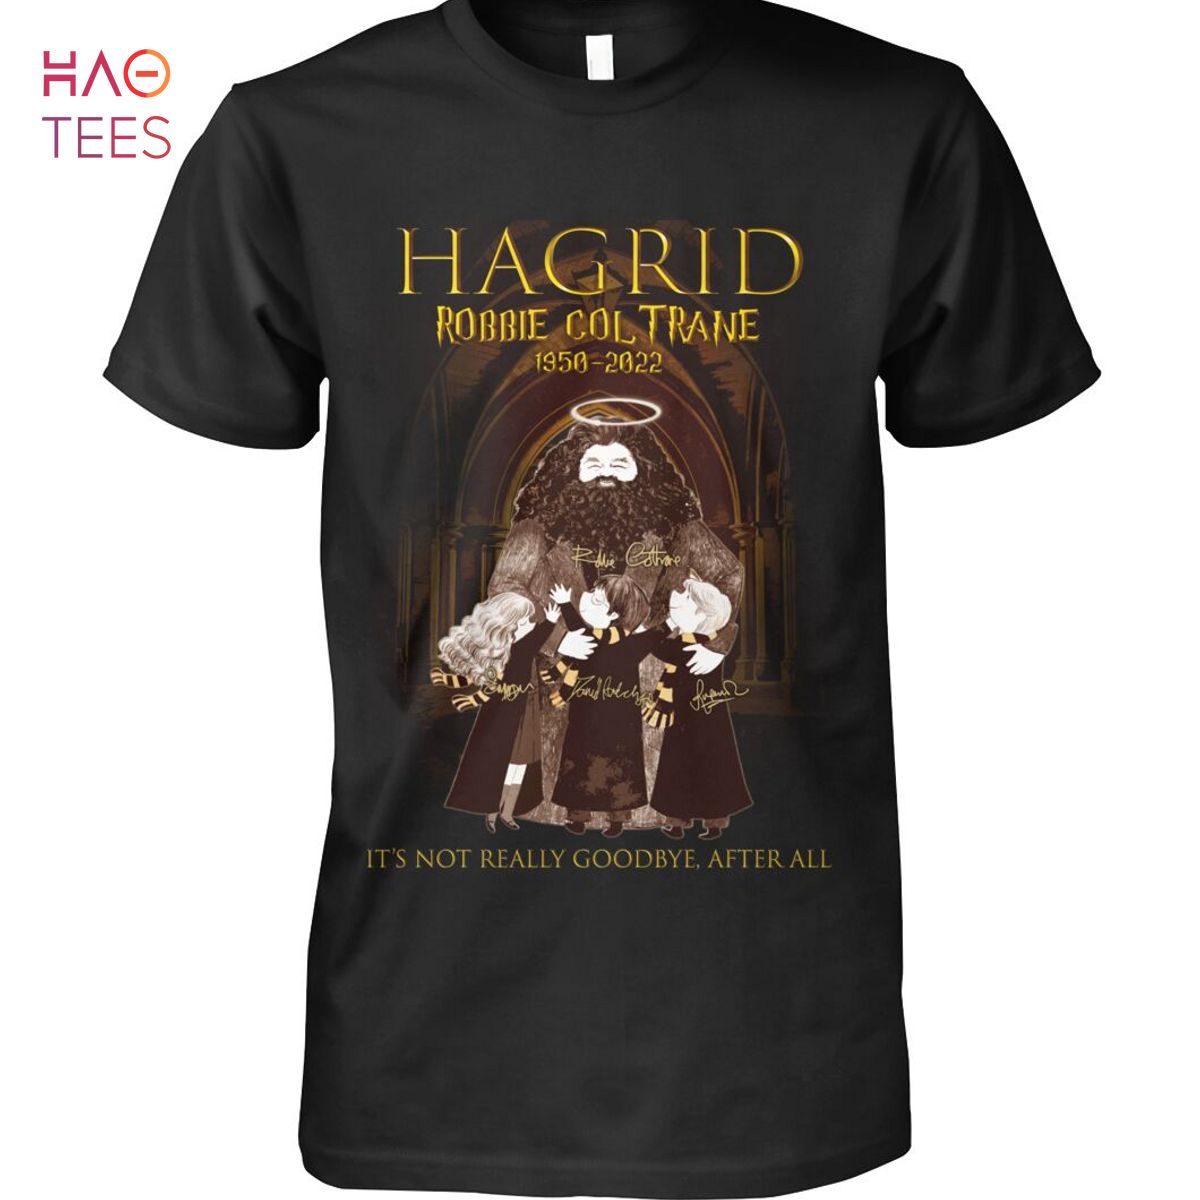 Hagrid Robbie Col Trane 1950-2022 It ‘s Not Really Goobye After All Shirt